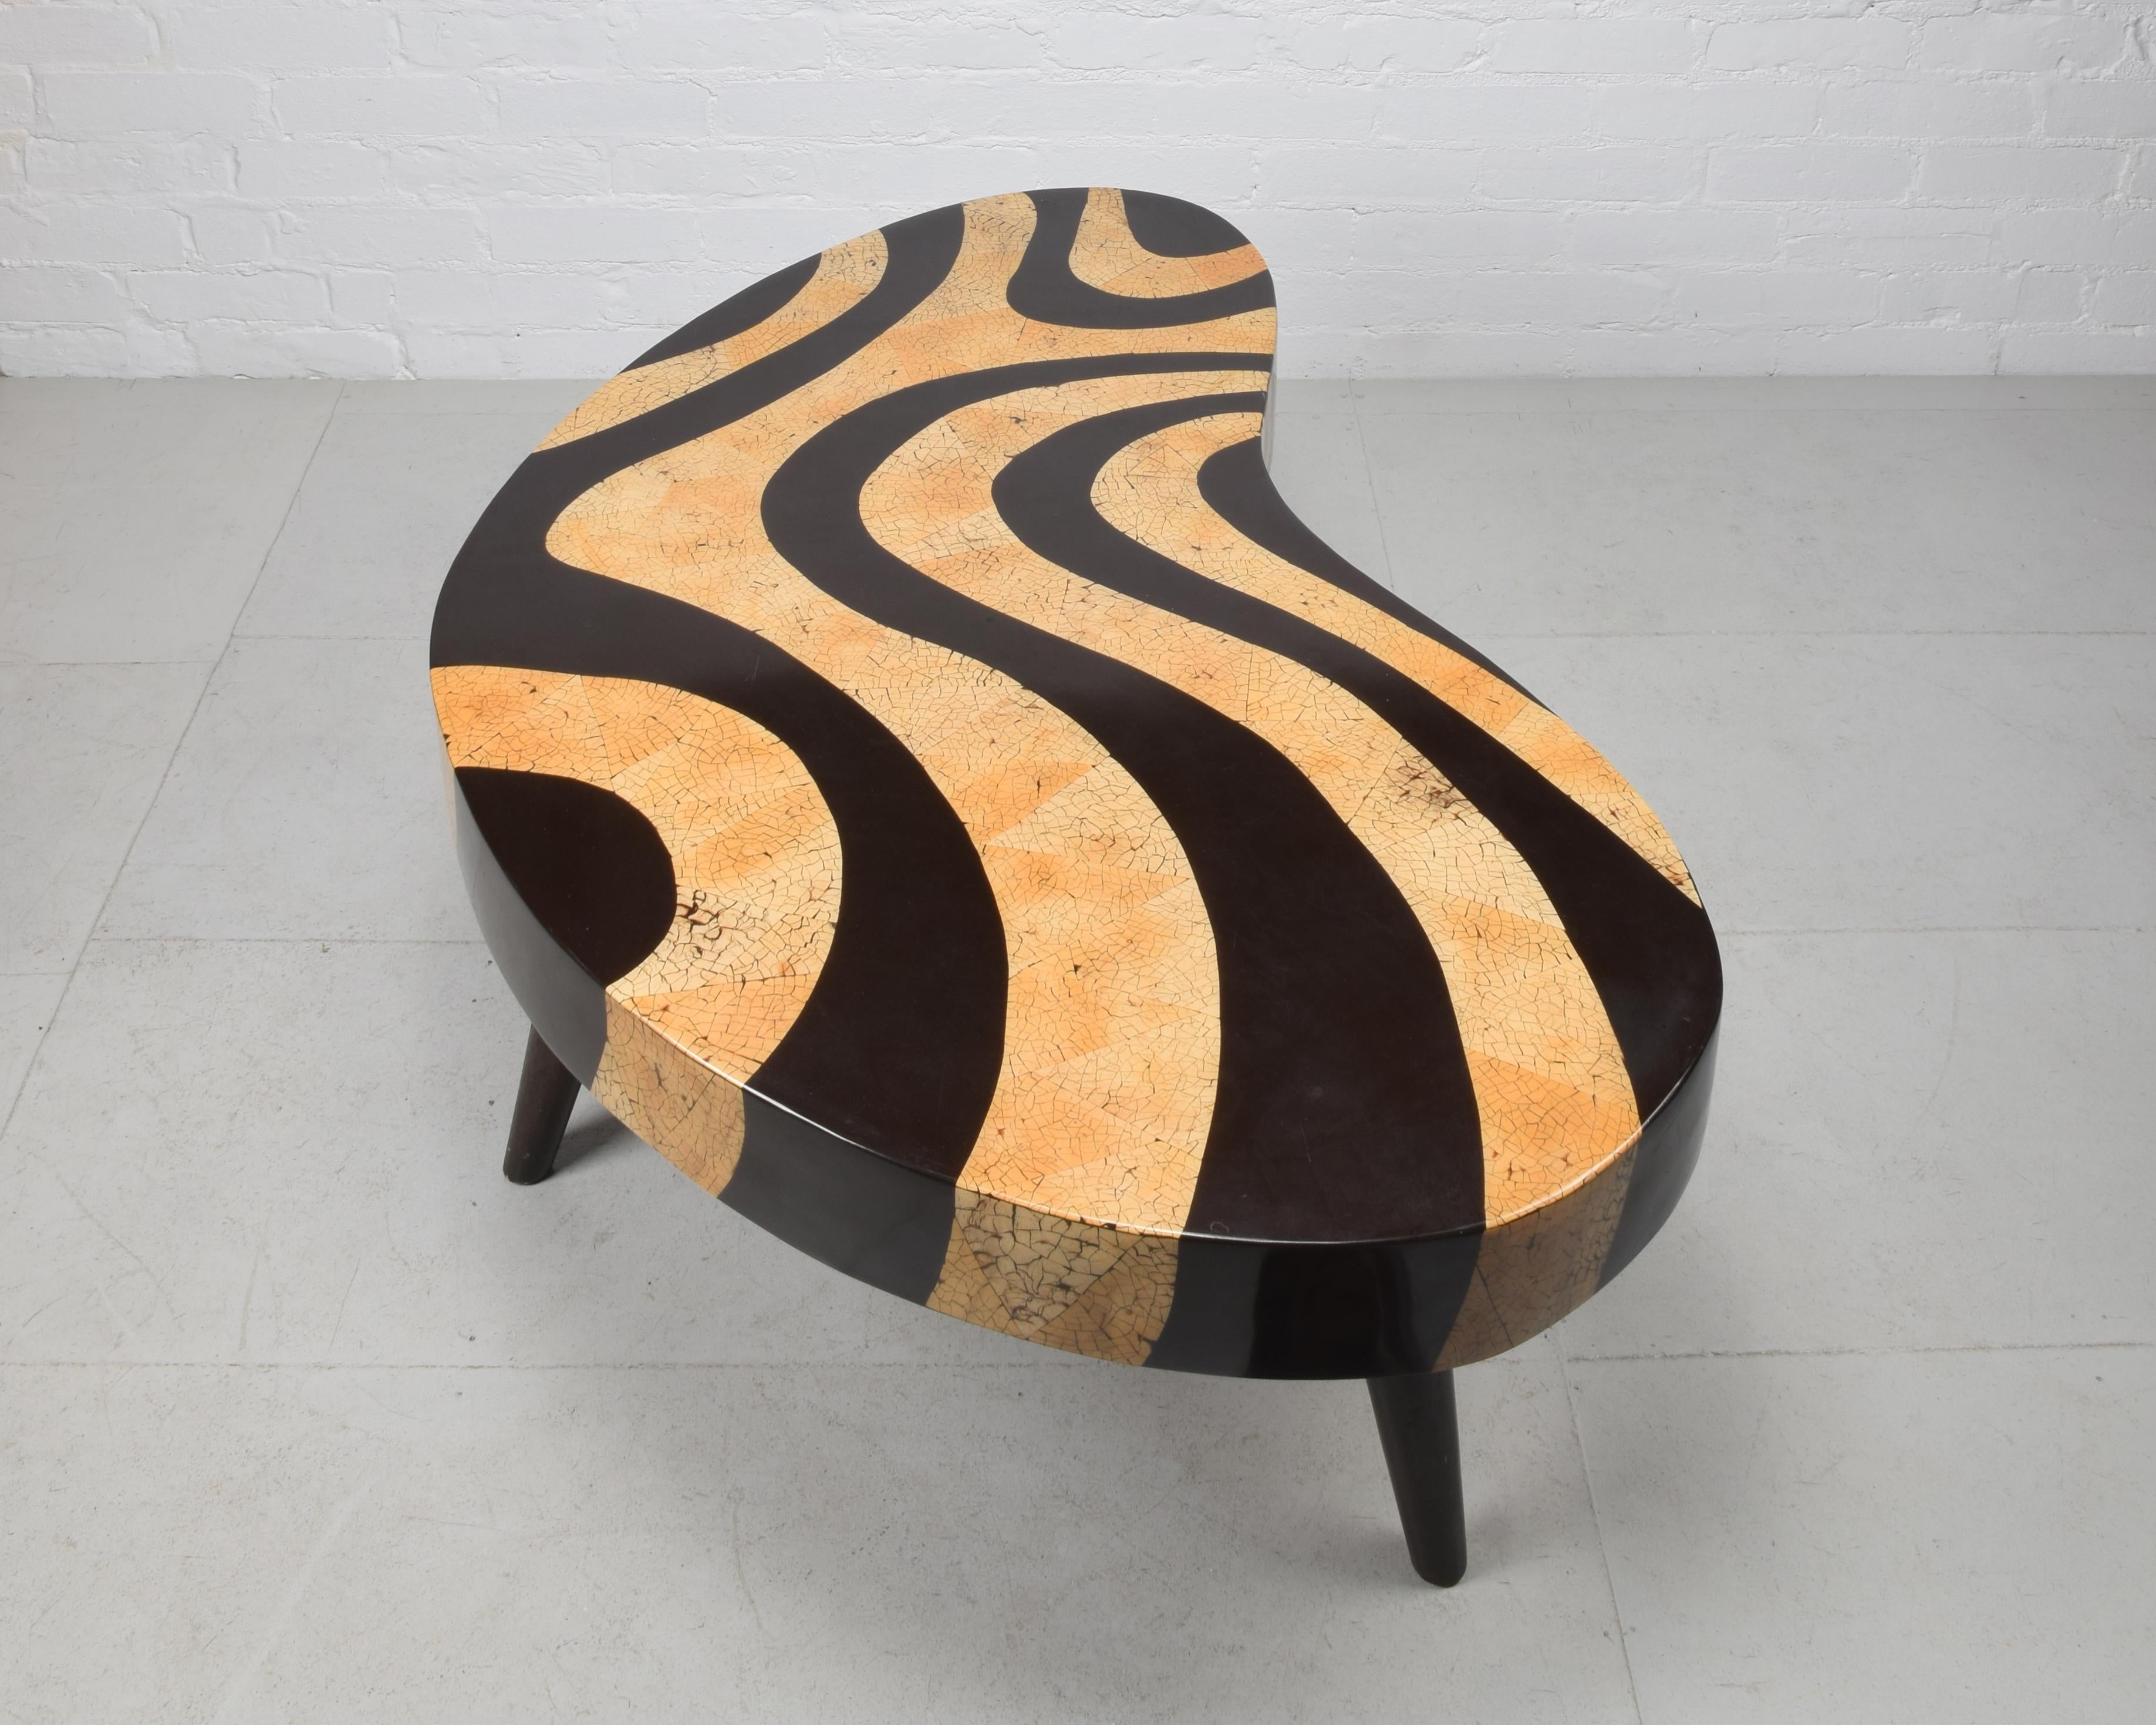 Biomorphic kidney-shaped coffee table with faux eggshell lacquer mosaic pattern In Good Condition For Sale In London, GB